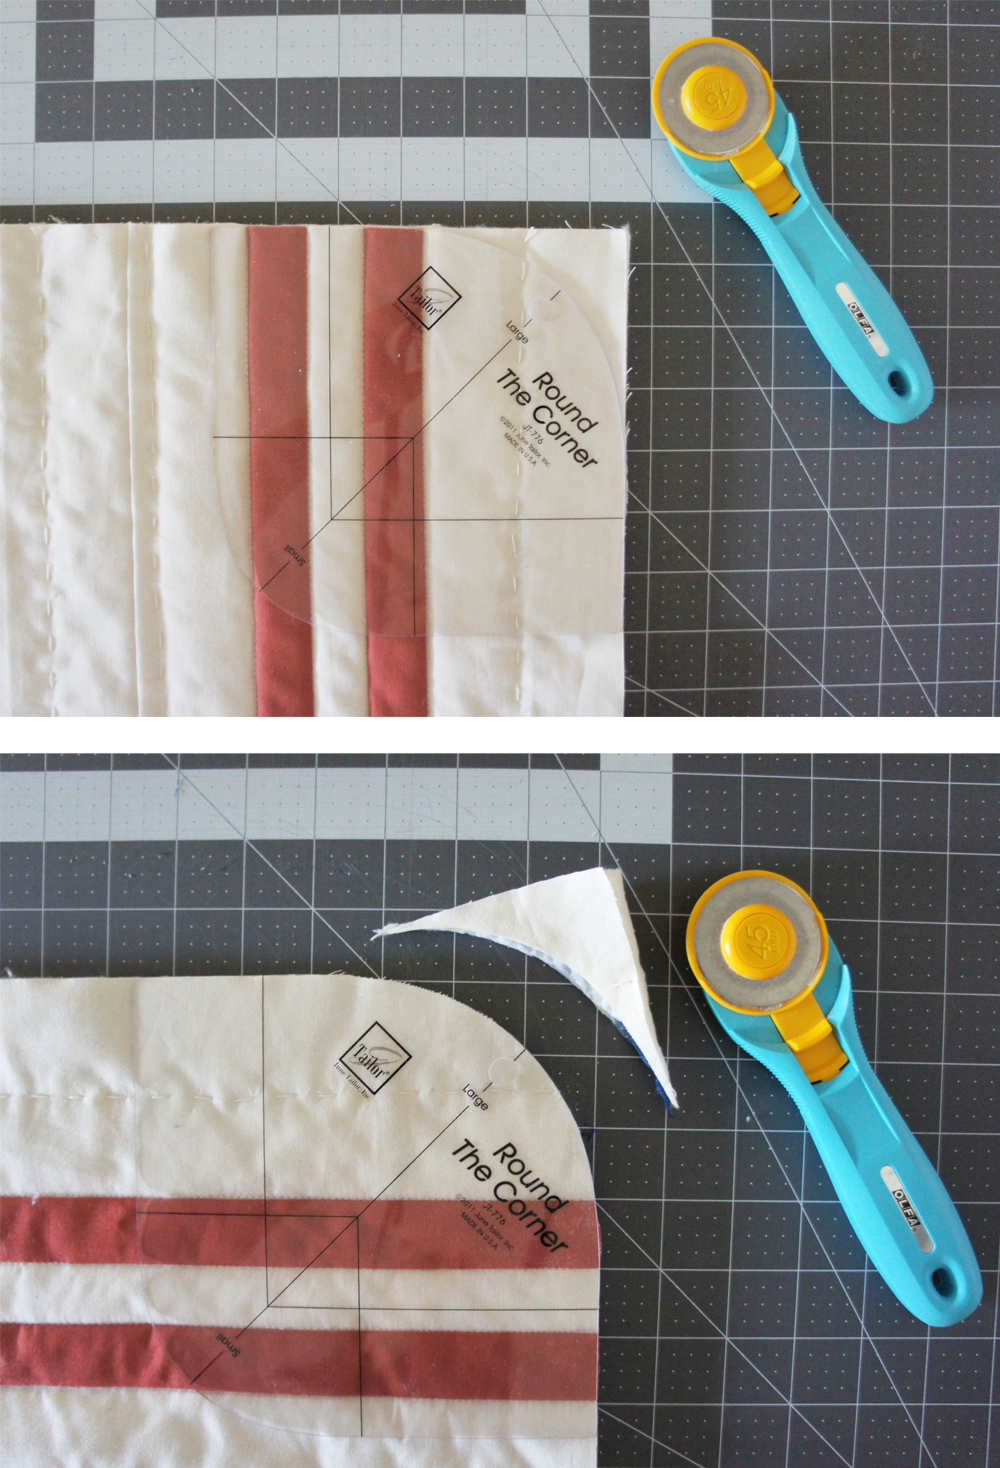 A step by step tutorial including photos and all the tools you need to get perfectly rounded quilt corners. Learn the best tips and tricks for rounding the corners of any quilt project and attaching a smooth binding. suzyquilts.com #sewingdiy #quilting